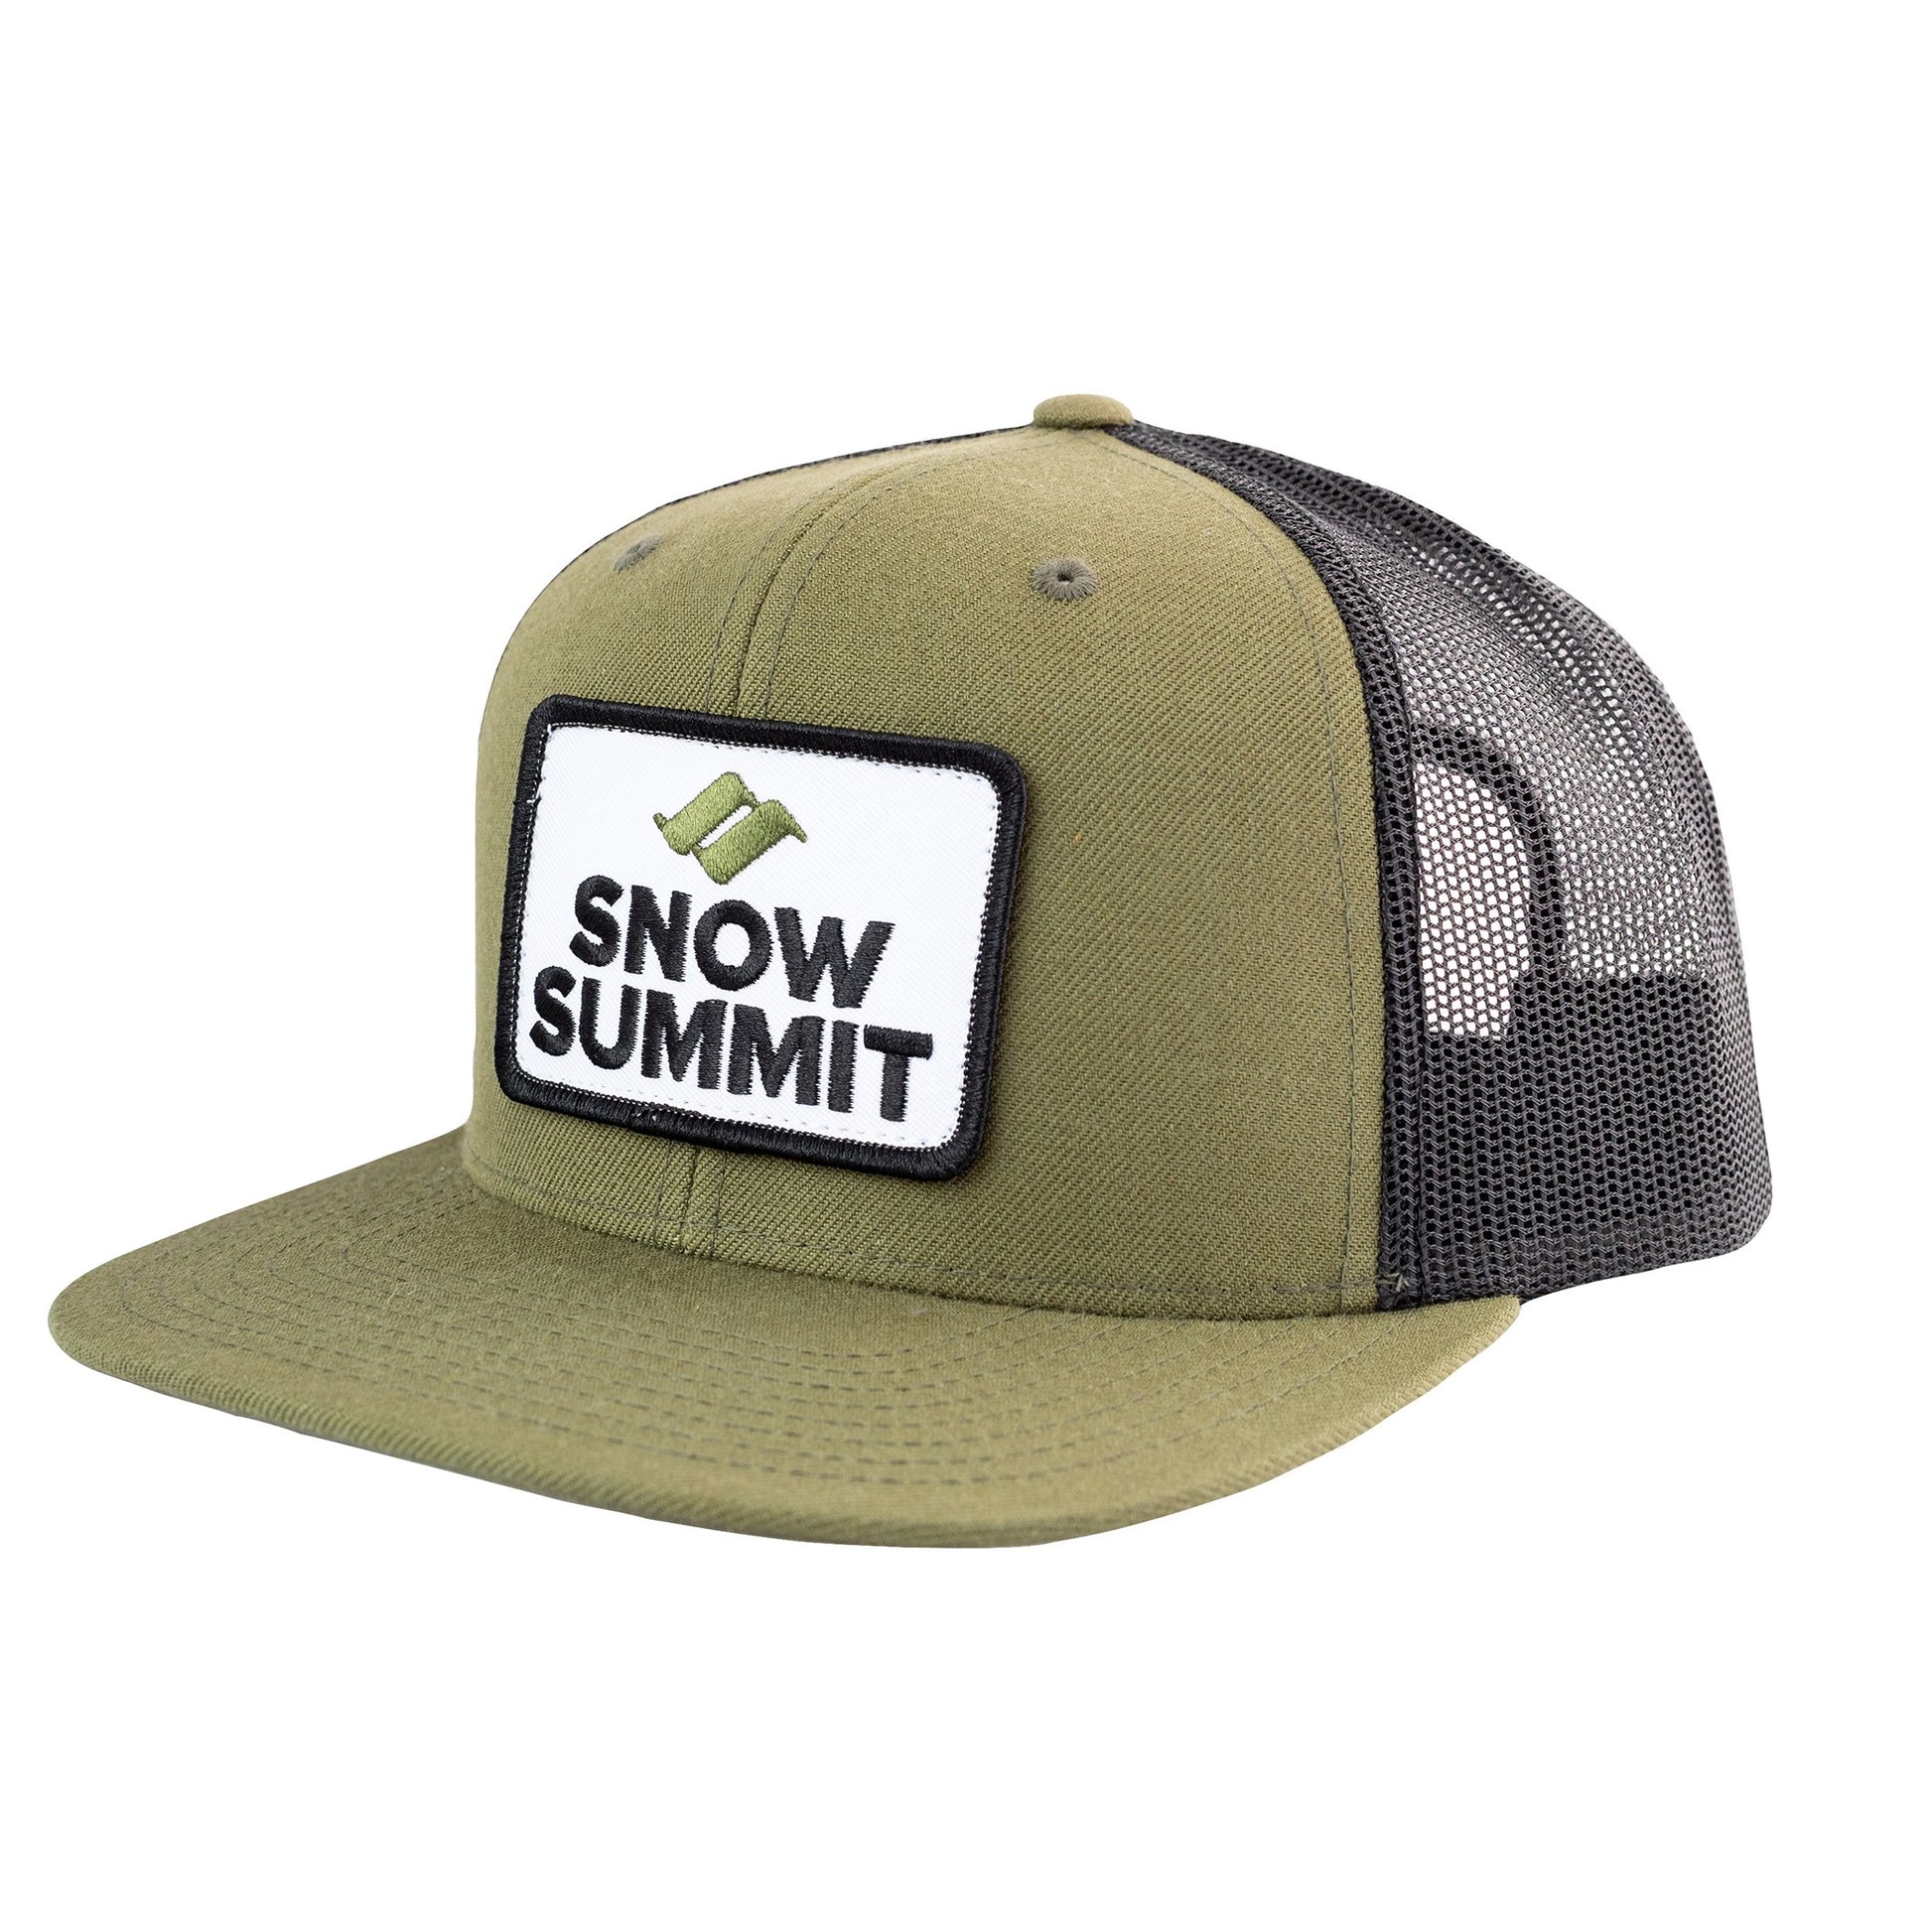 Olive/Black Snow Summit Flat Bill Trucker Hat with Emboidered Patch Logo